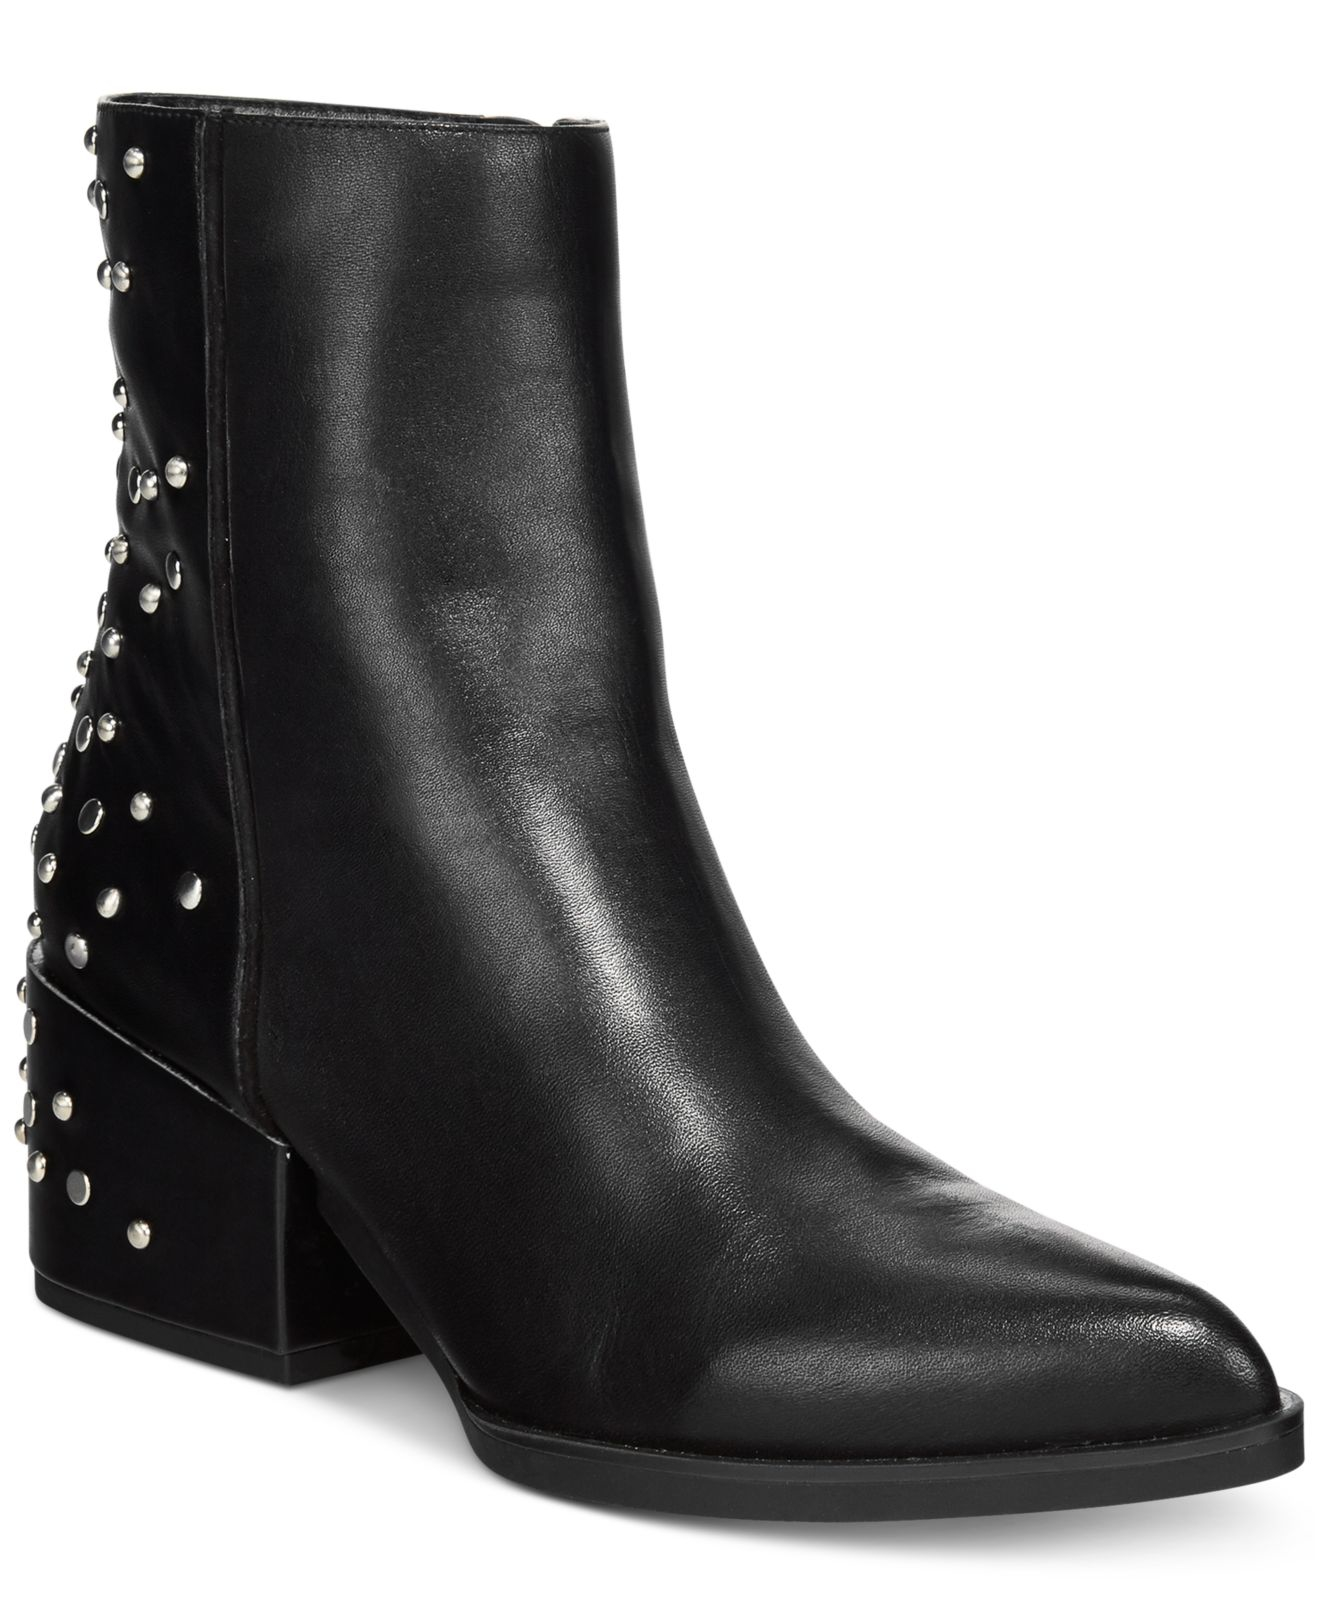 Circus by Sam Edelman Rae Studded Booties in Black | Lyst